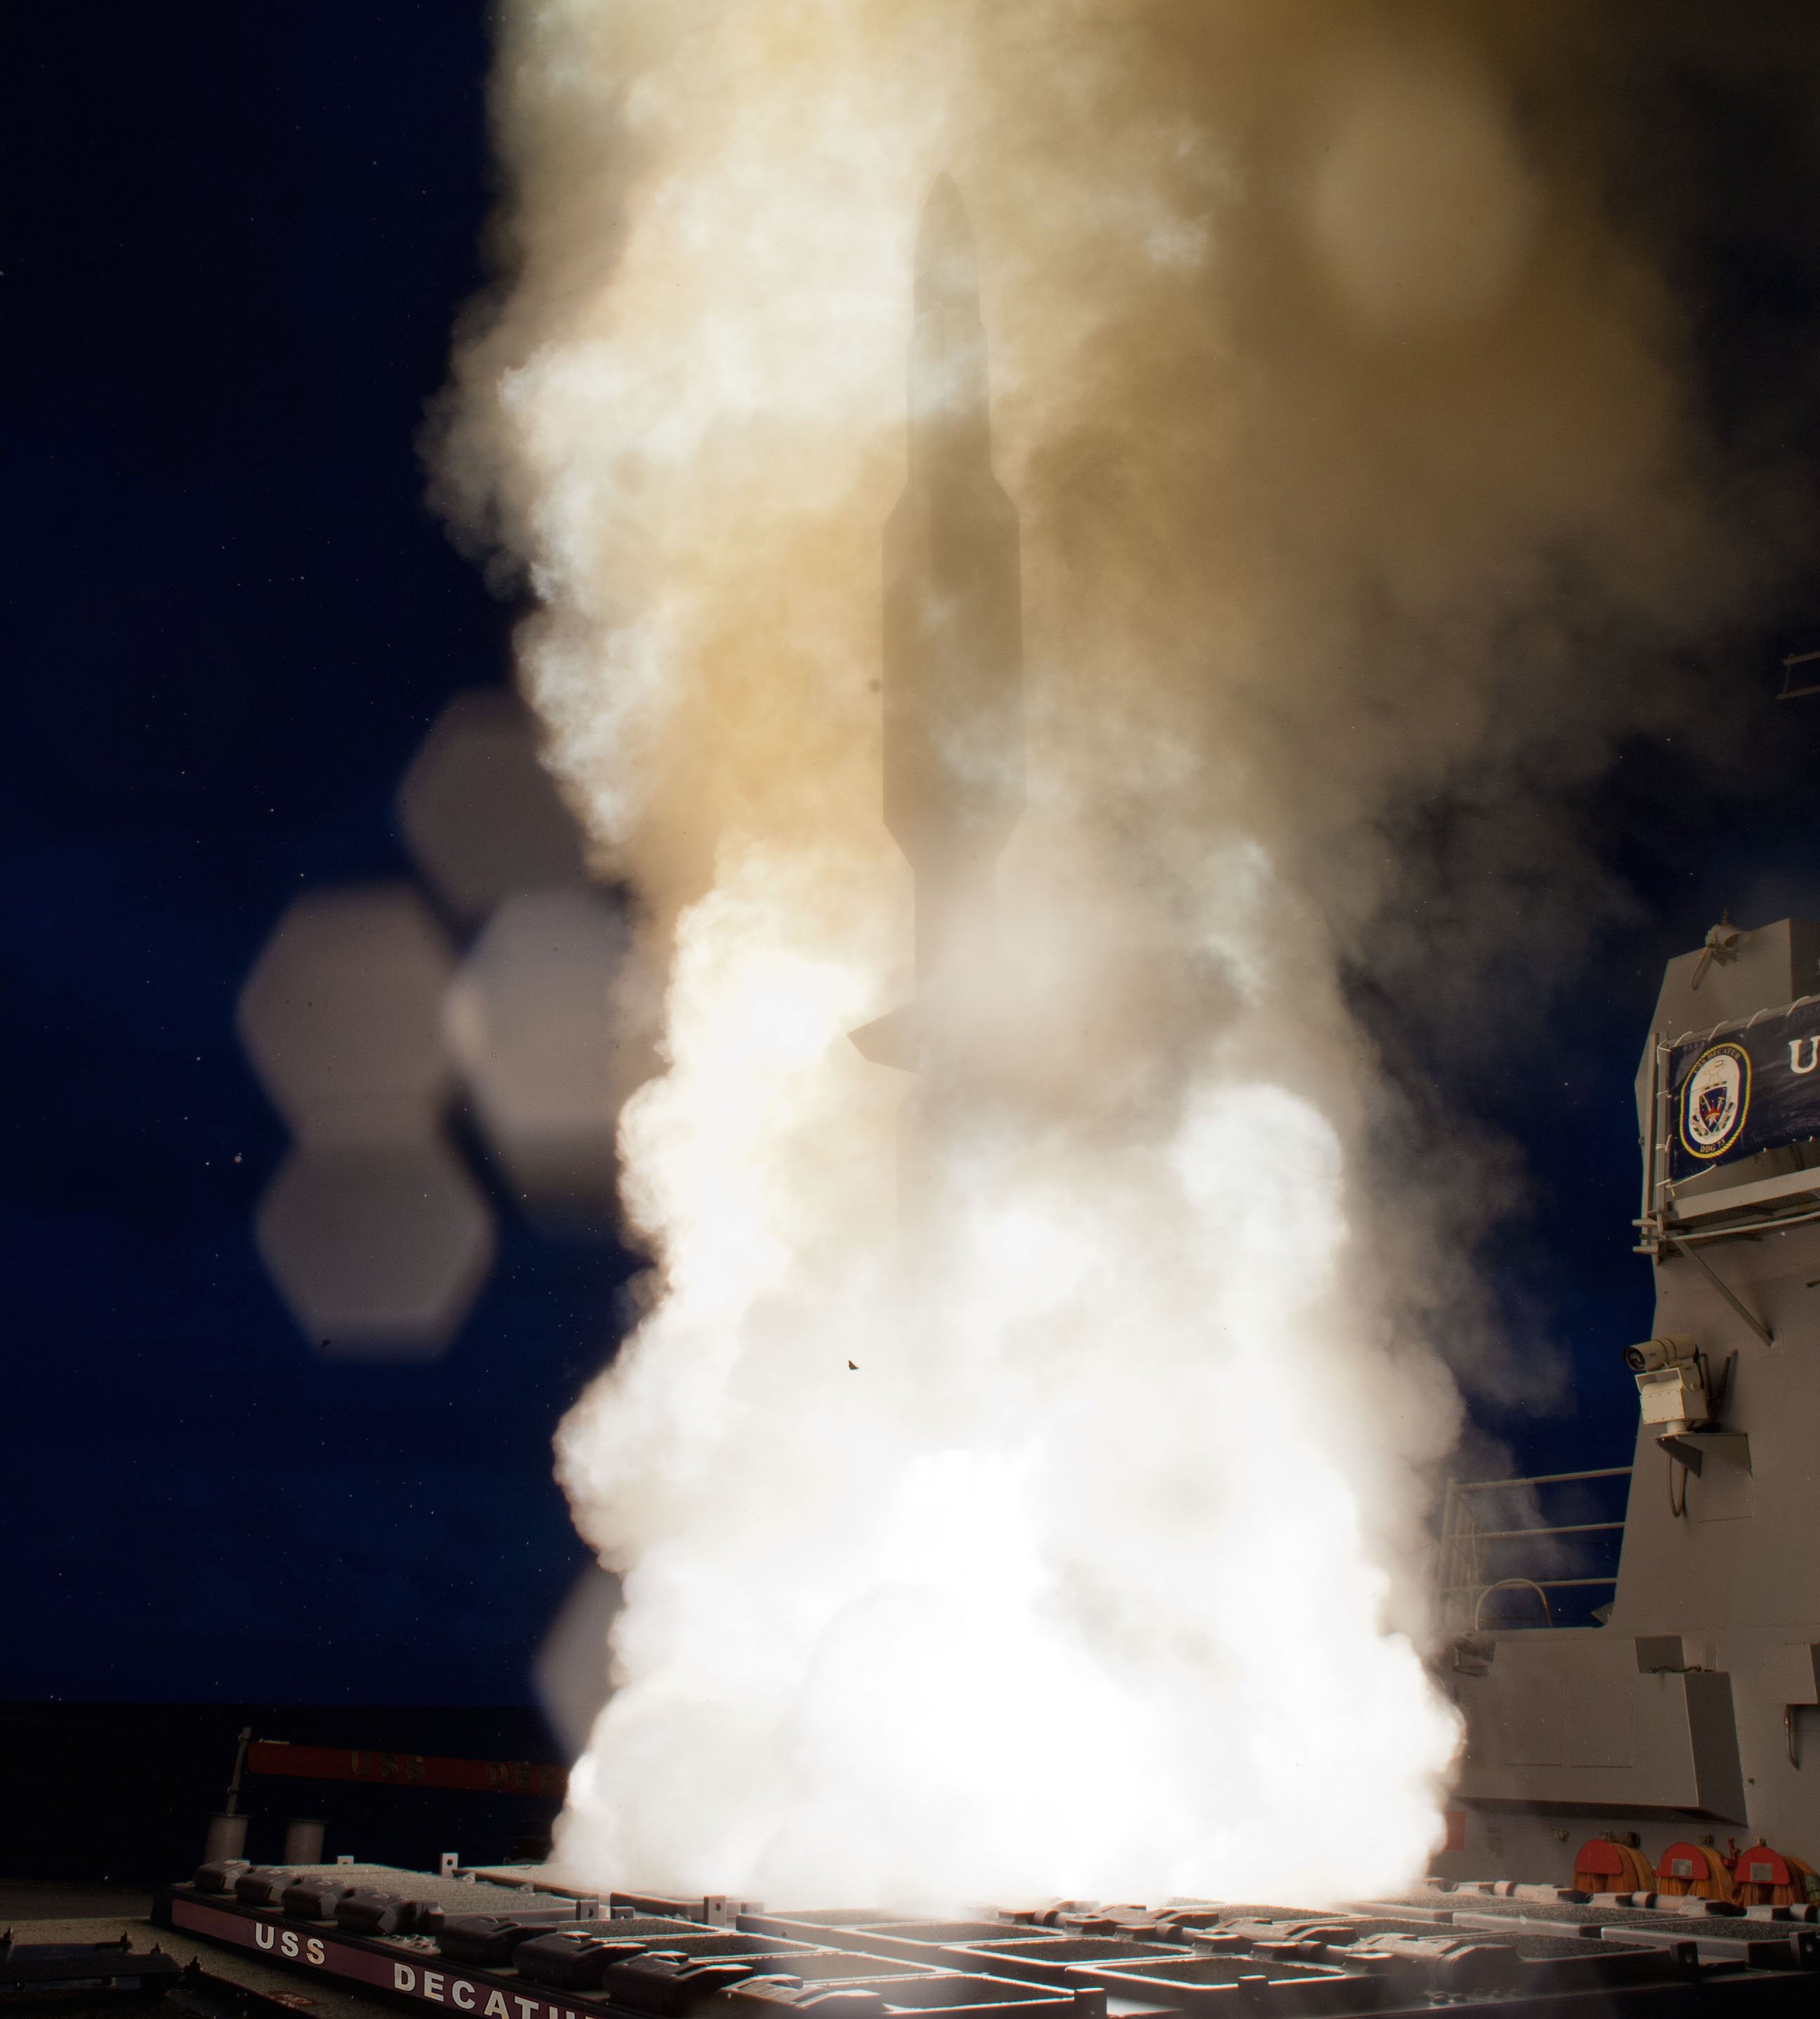 A Standard Missile-3 (SM-3) Block 1A interceptor is launched from the guided-missile destroyer USS Decatur (DDG-73) on Sept. 9, 2013. US Navy Photo